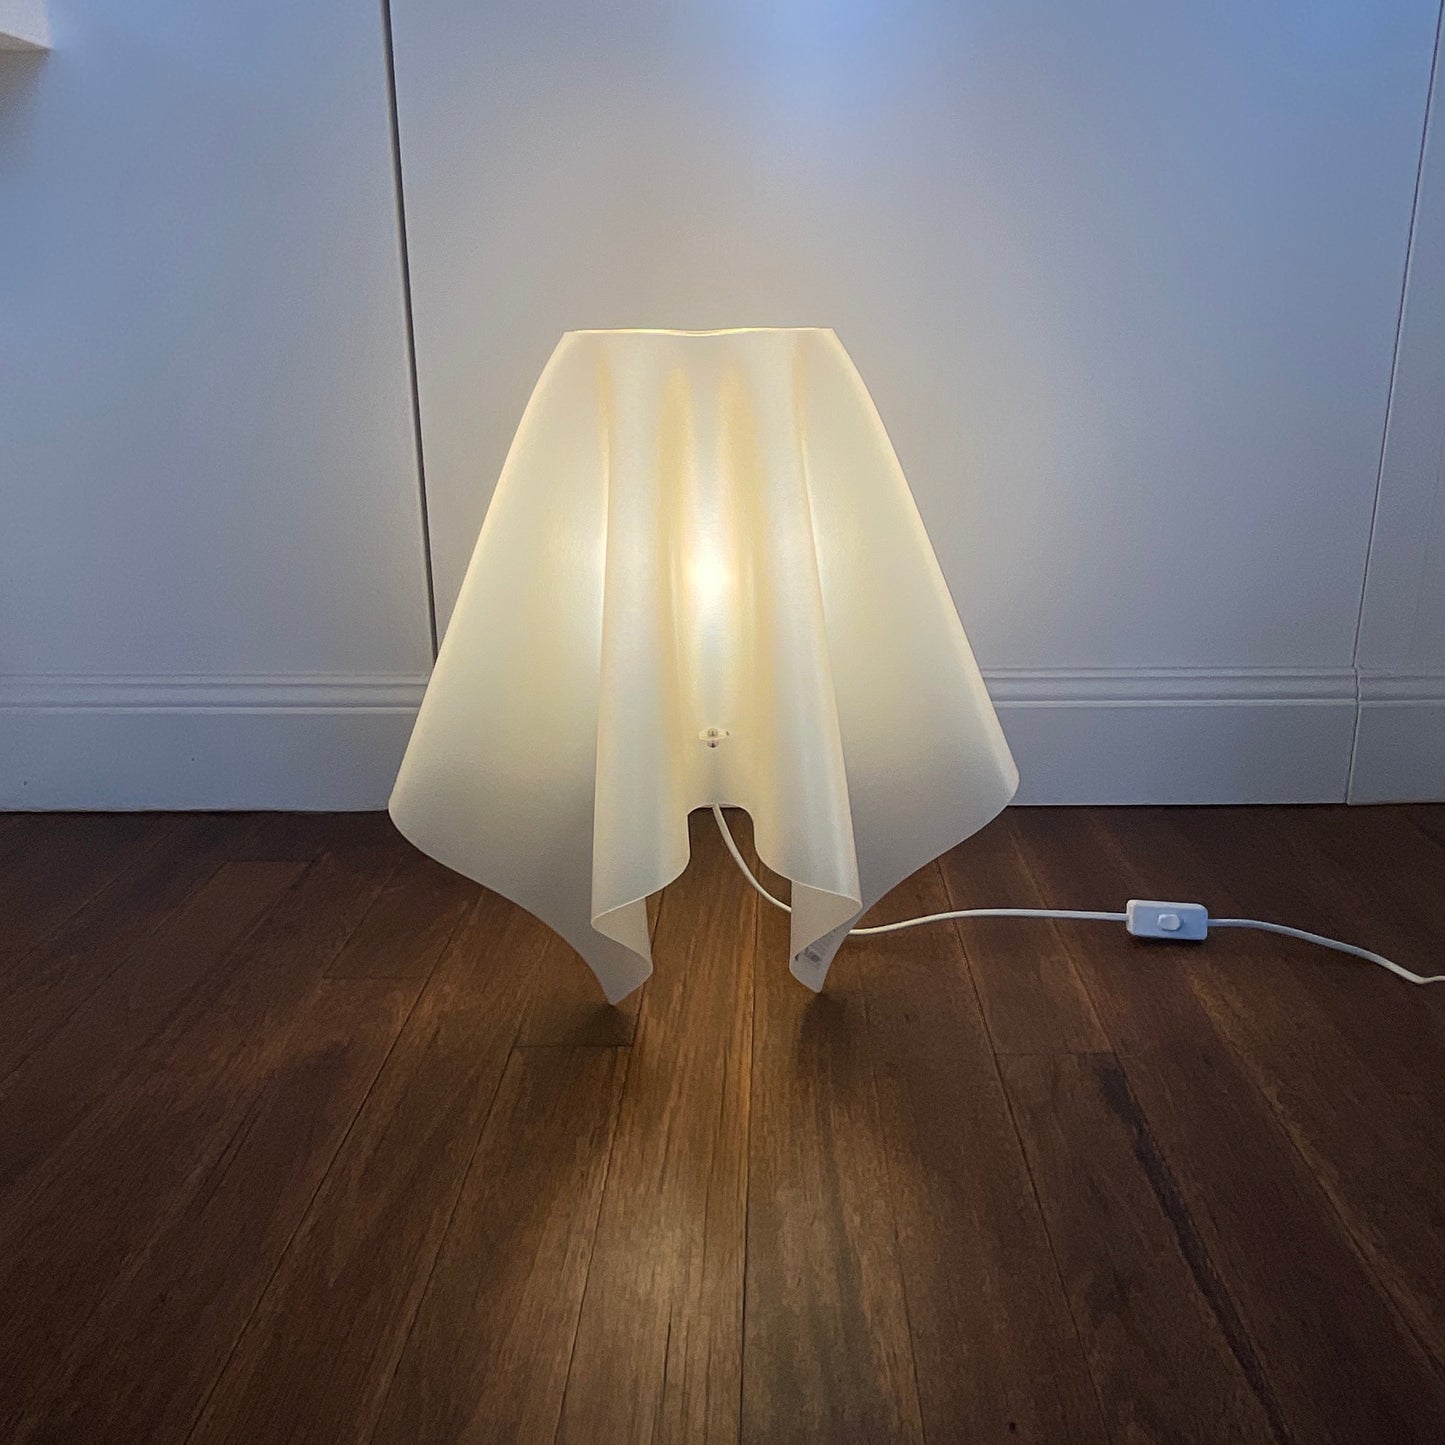 Foulard Table Lamp by Slamp (8 available)